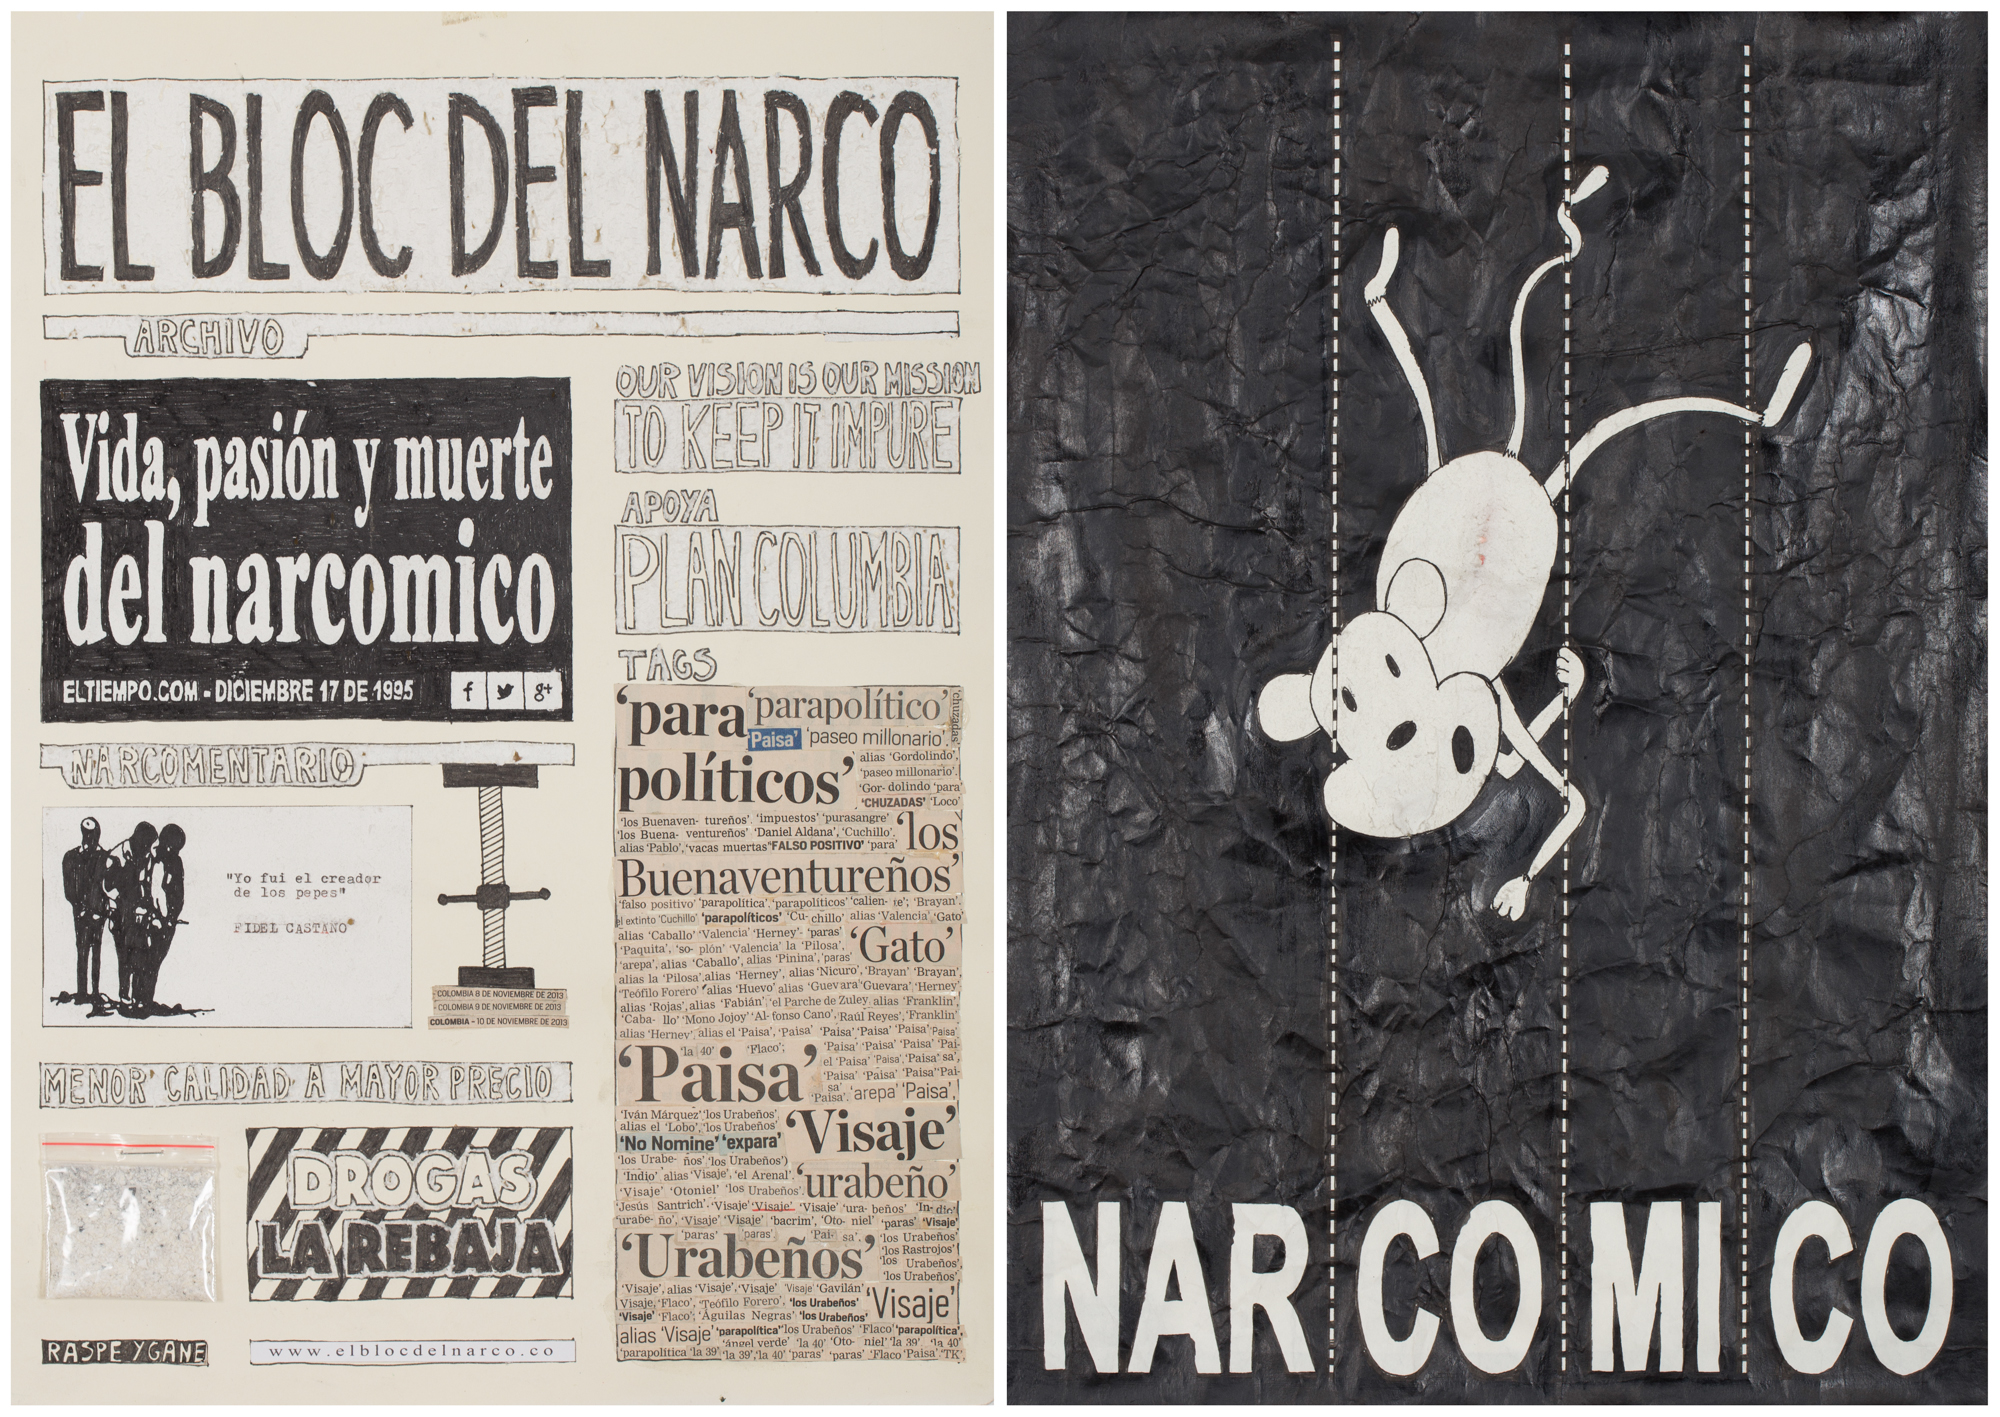 Camilo Restrepo. <em>El Bloc Del Narco #7</em>, 2016. Ink, water-soluble wax pastel, tape, glue, newspaper clippings, staples, plastic bag, paper dust and saliva on paper, 16 1/2 x 24 inches (41.9 x 61 cm)